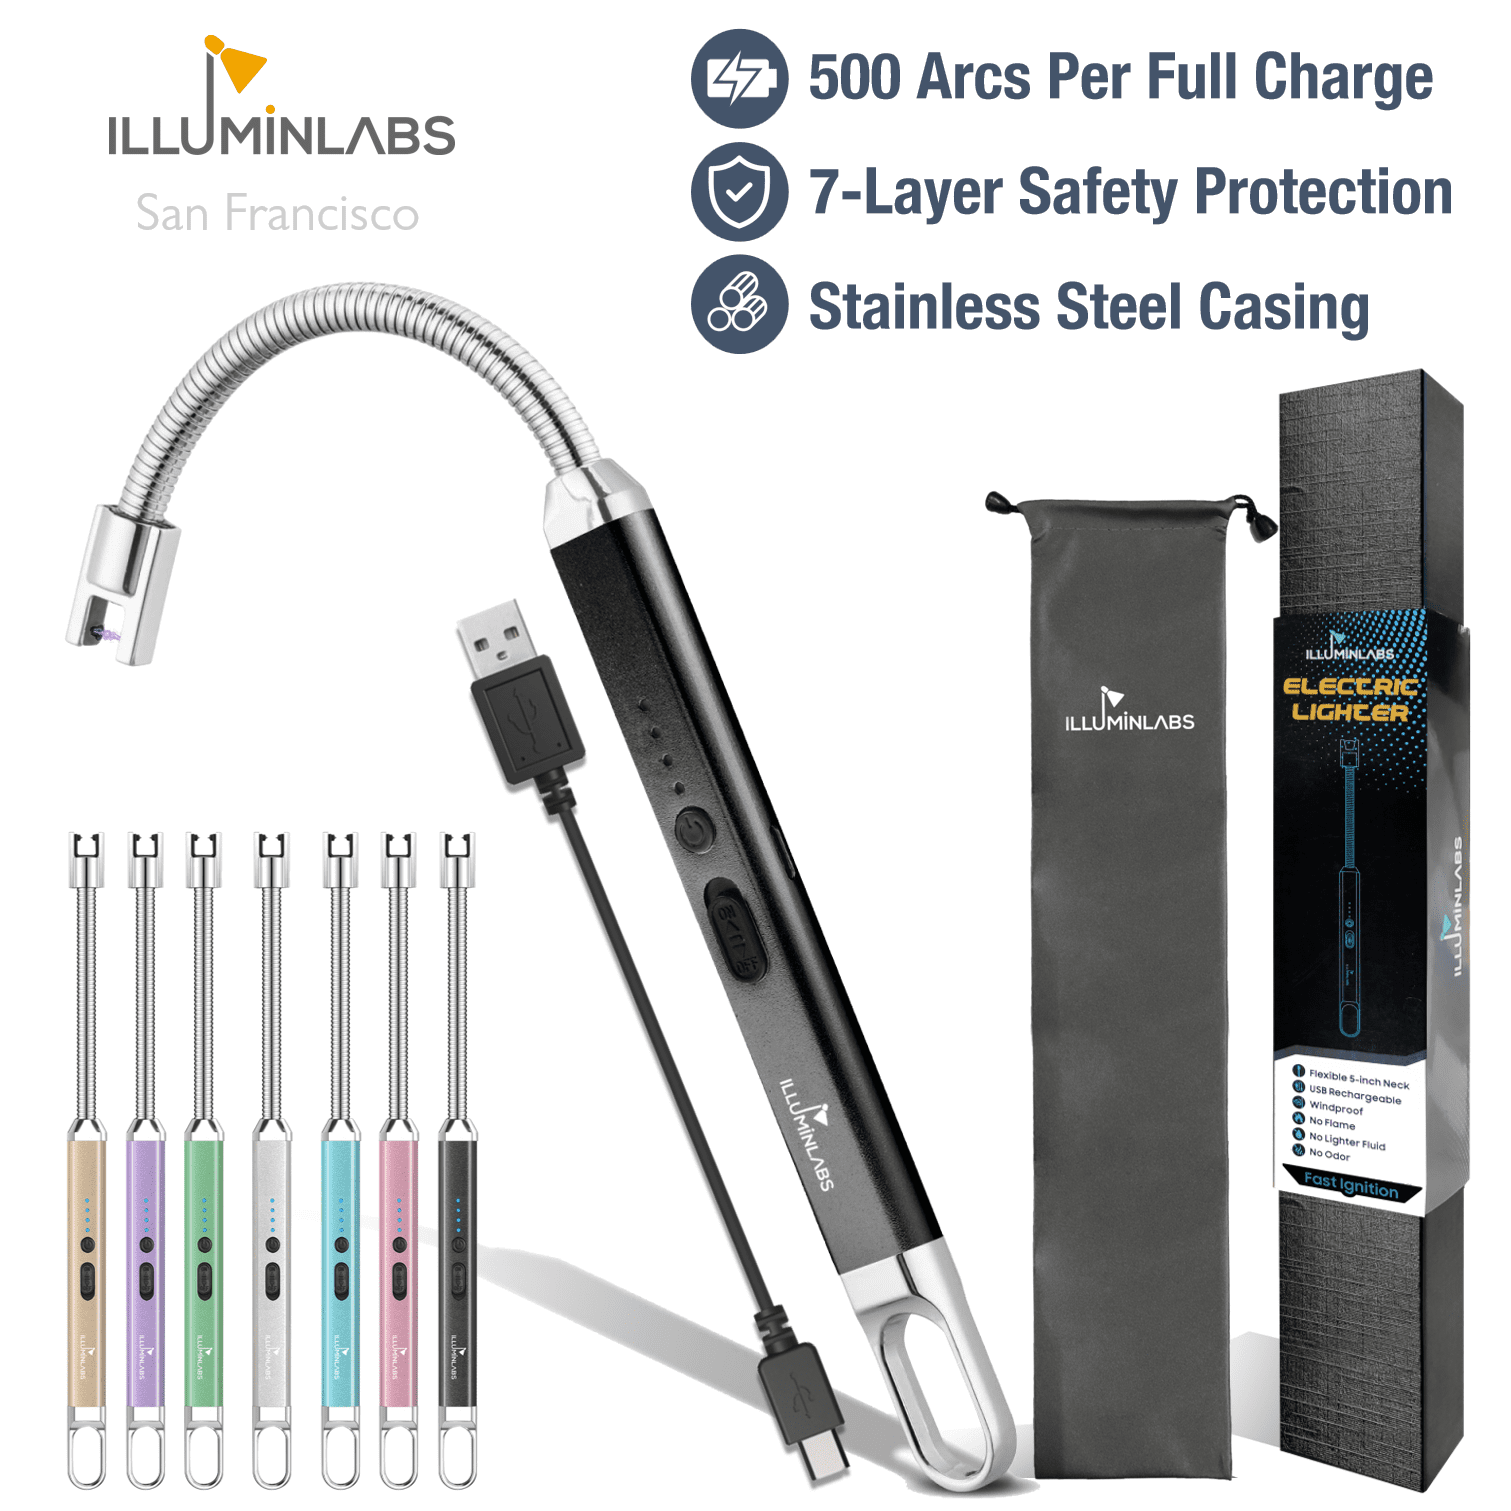 Illuminlabs Electric Lighter - USB Rechargeable Long Grill Lighter with Flexible Neck, Windproof Flameless Plasma Lighter, Arc Lighter for Camping, Cigarettes and Stove, Silver - Walmart.com